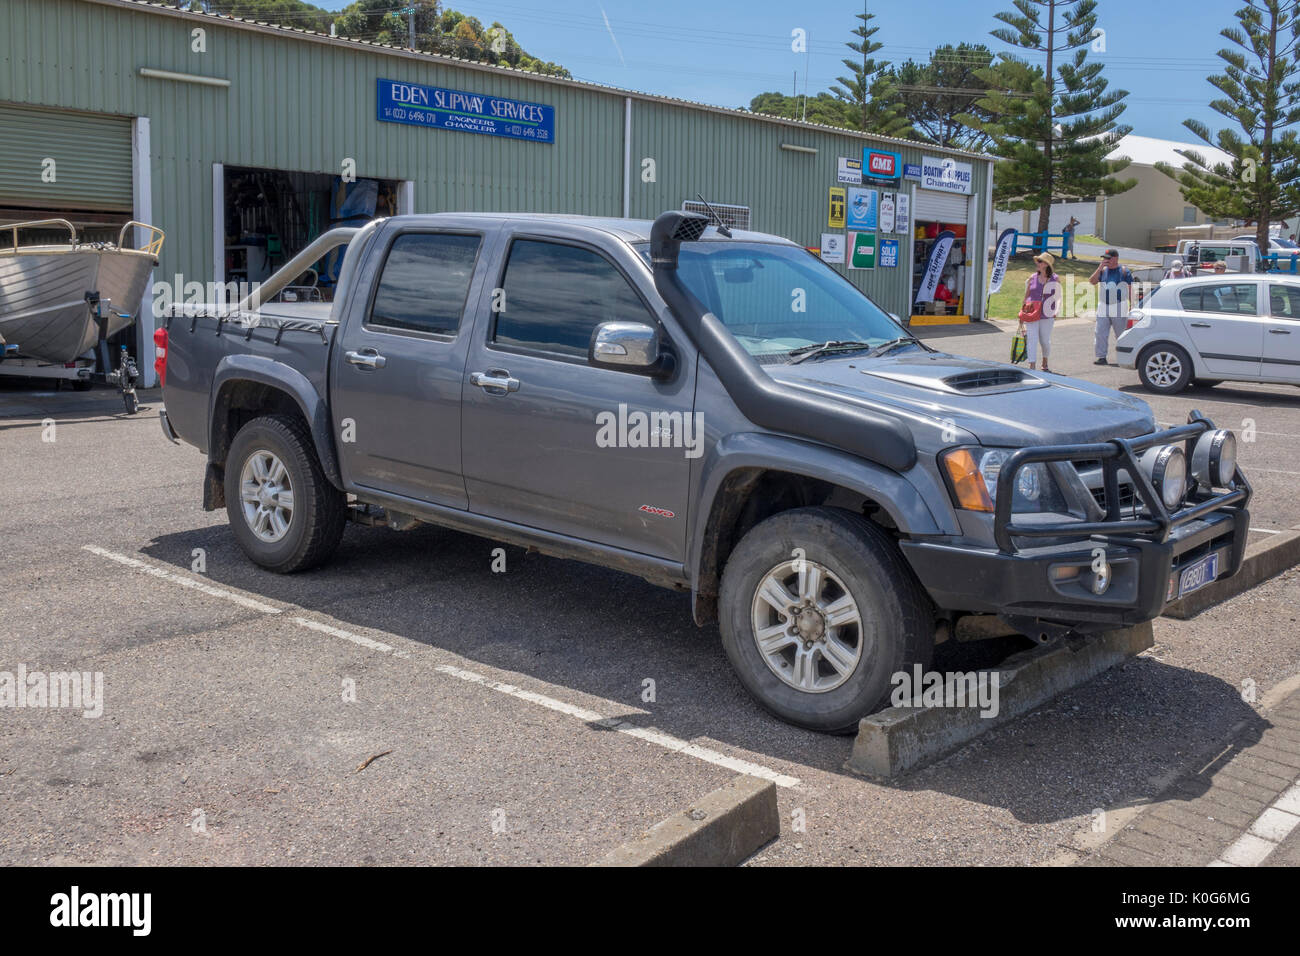 A Four Door Pick Up Truck UTE Utility Vehicle Fitted With Bullbar And Snorkle Exhaust For Crossing Rivers And Streams New South Wales Australia Stock Photo